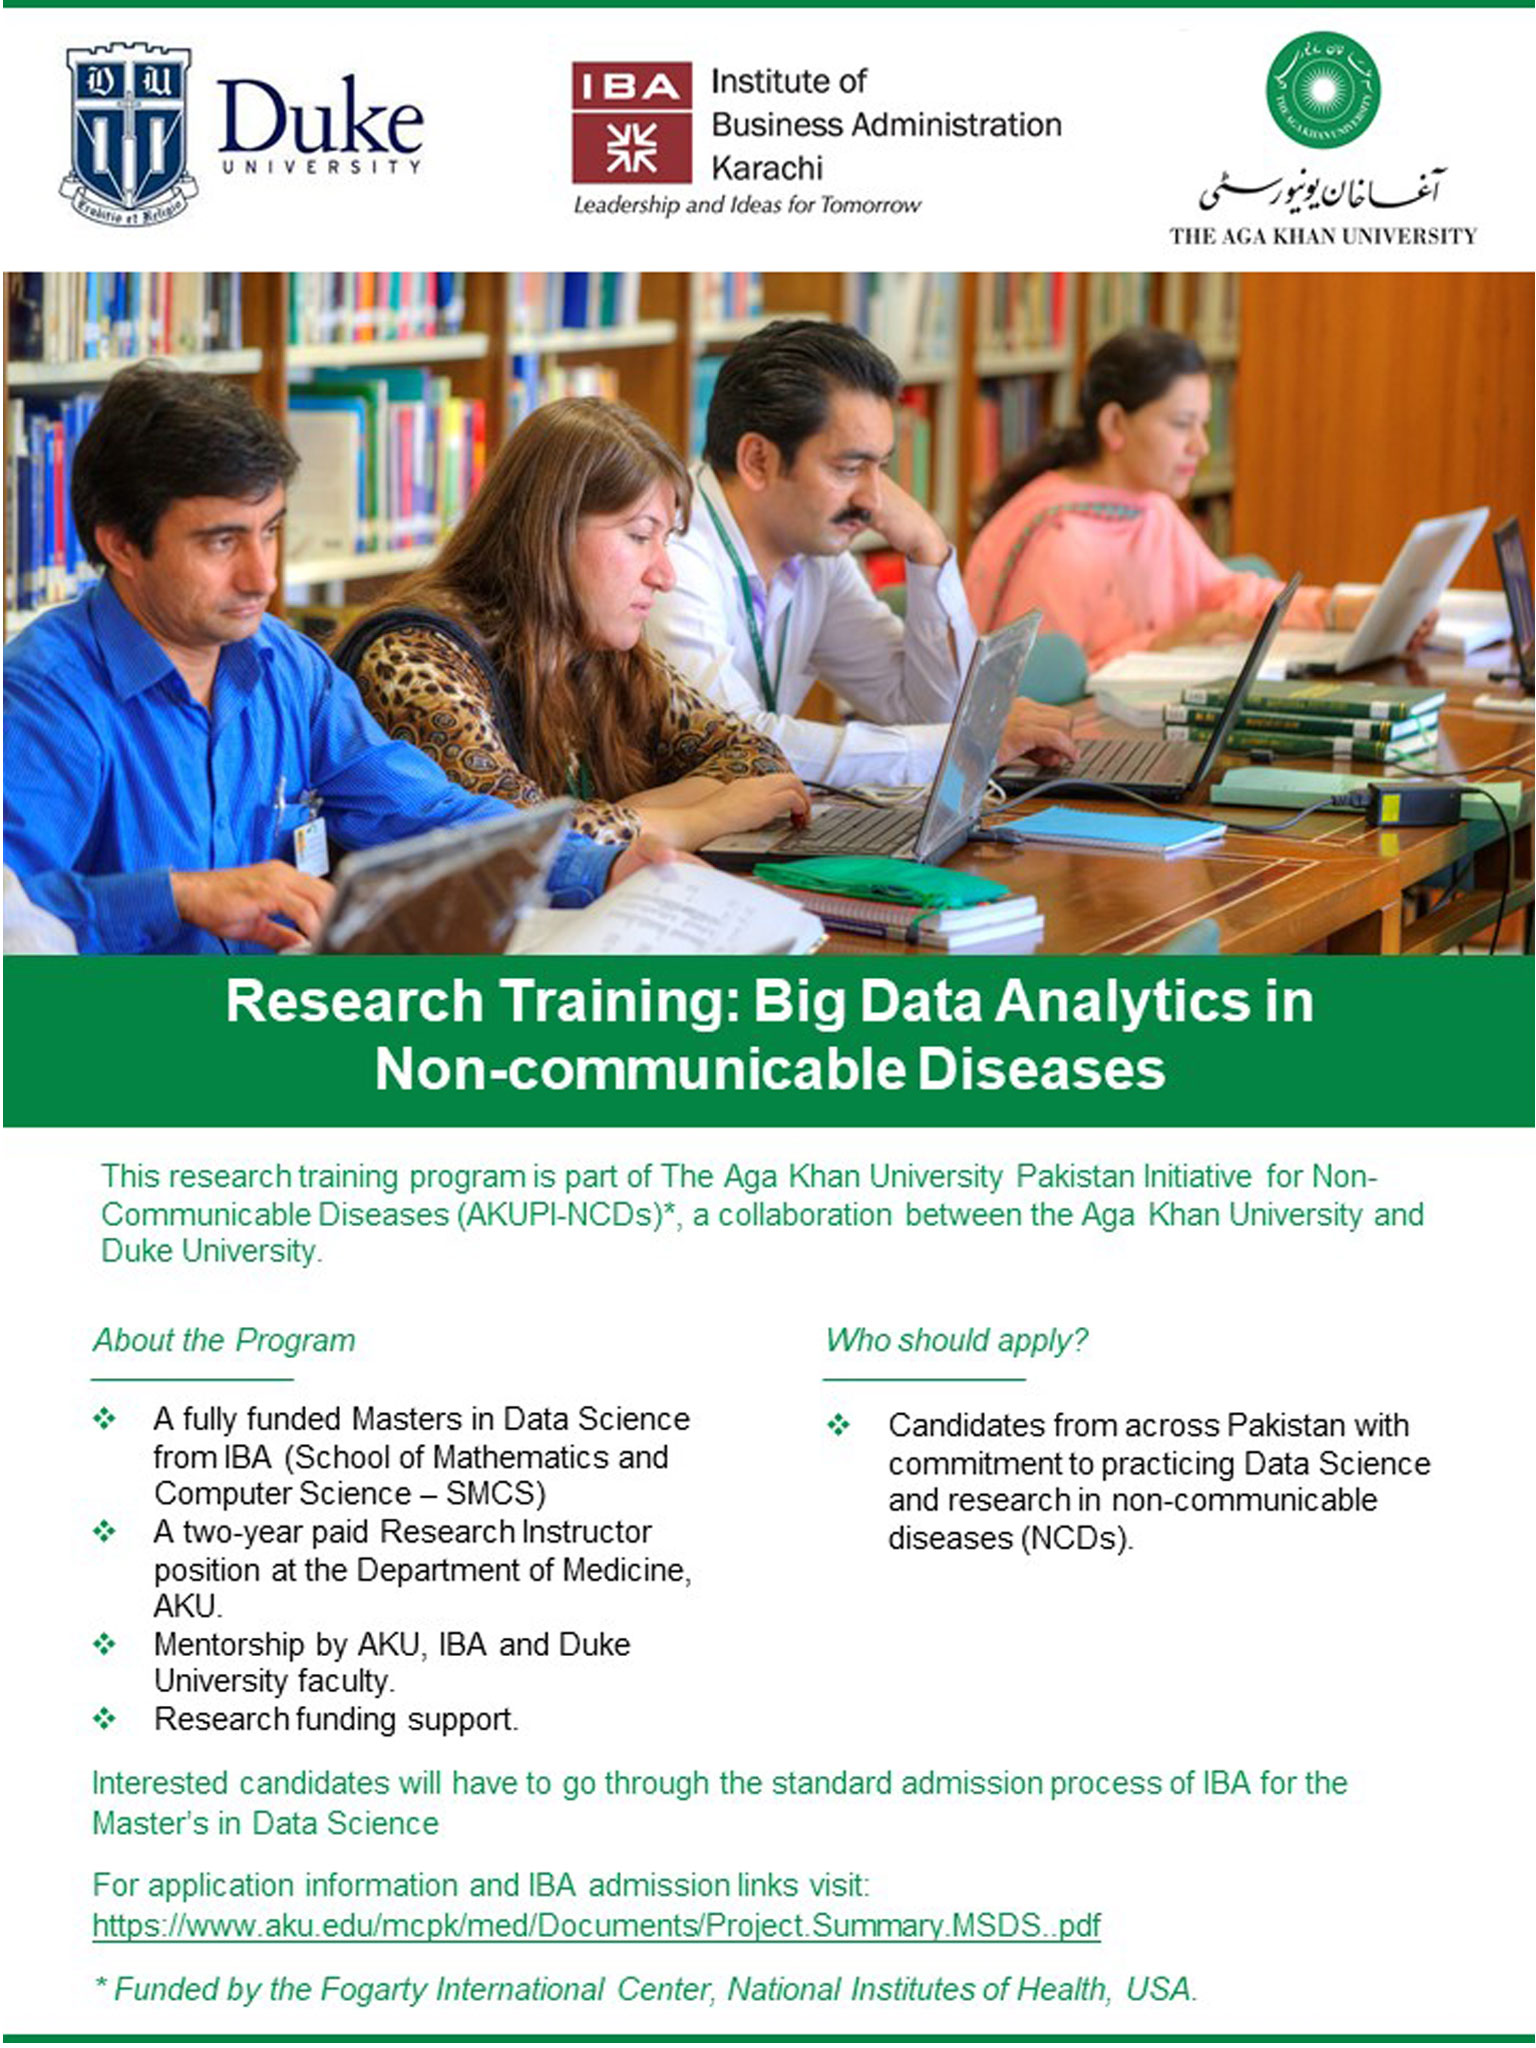 Research Training: Big Data Analytics in Non-communicable Diseases